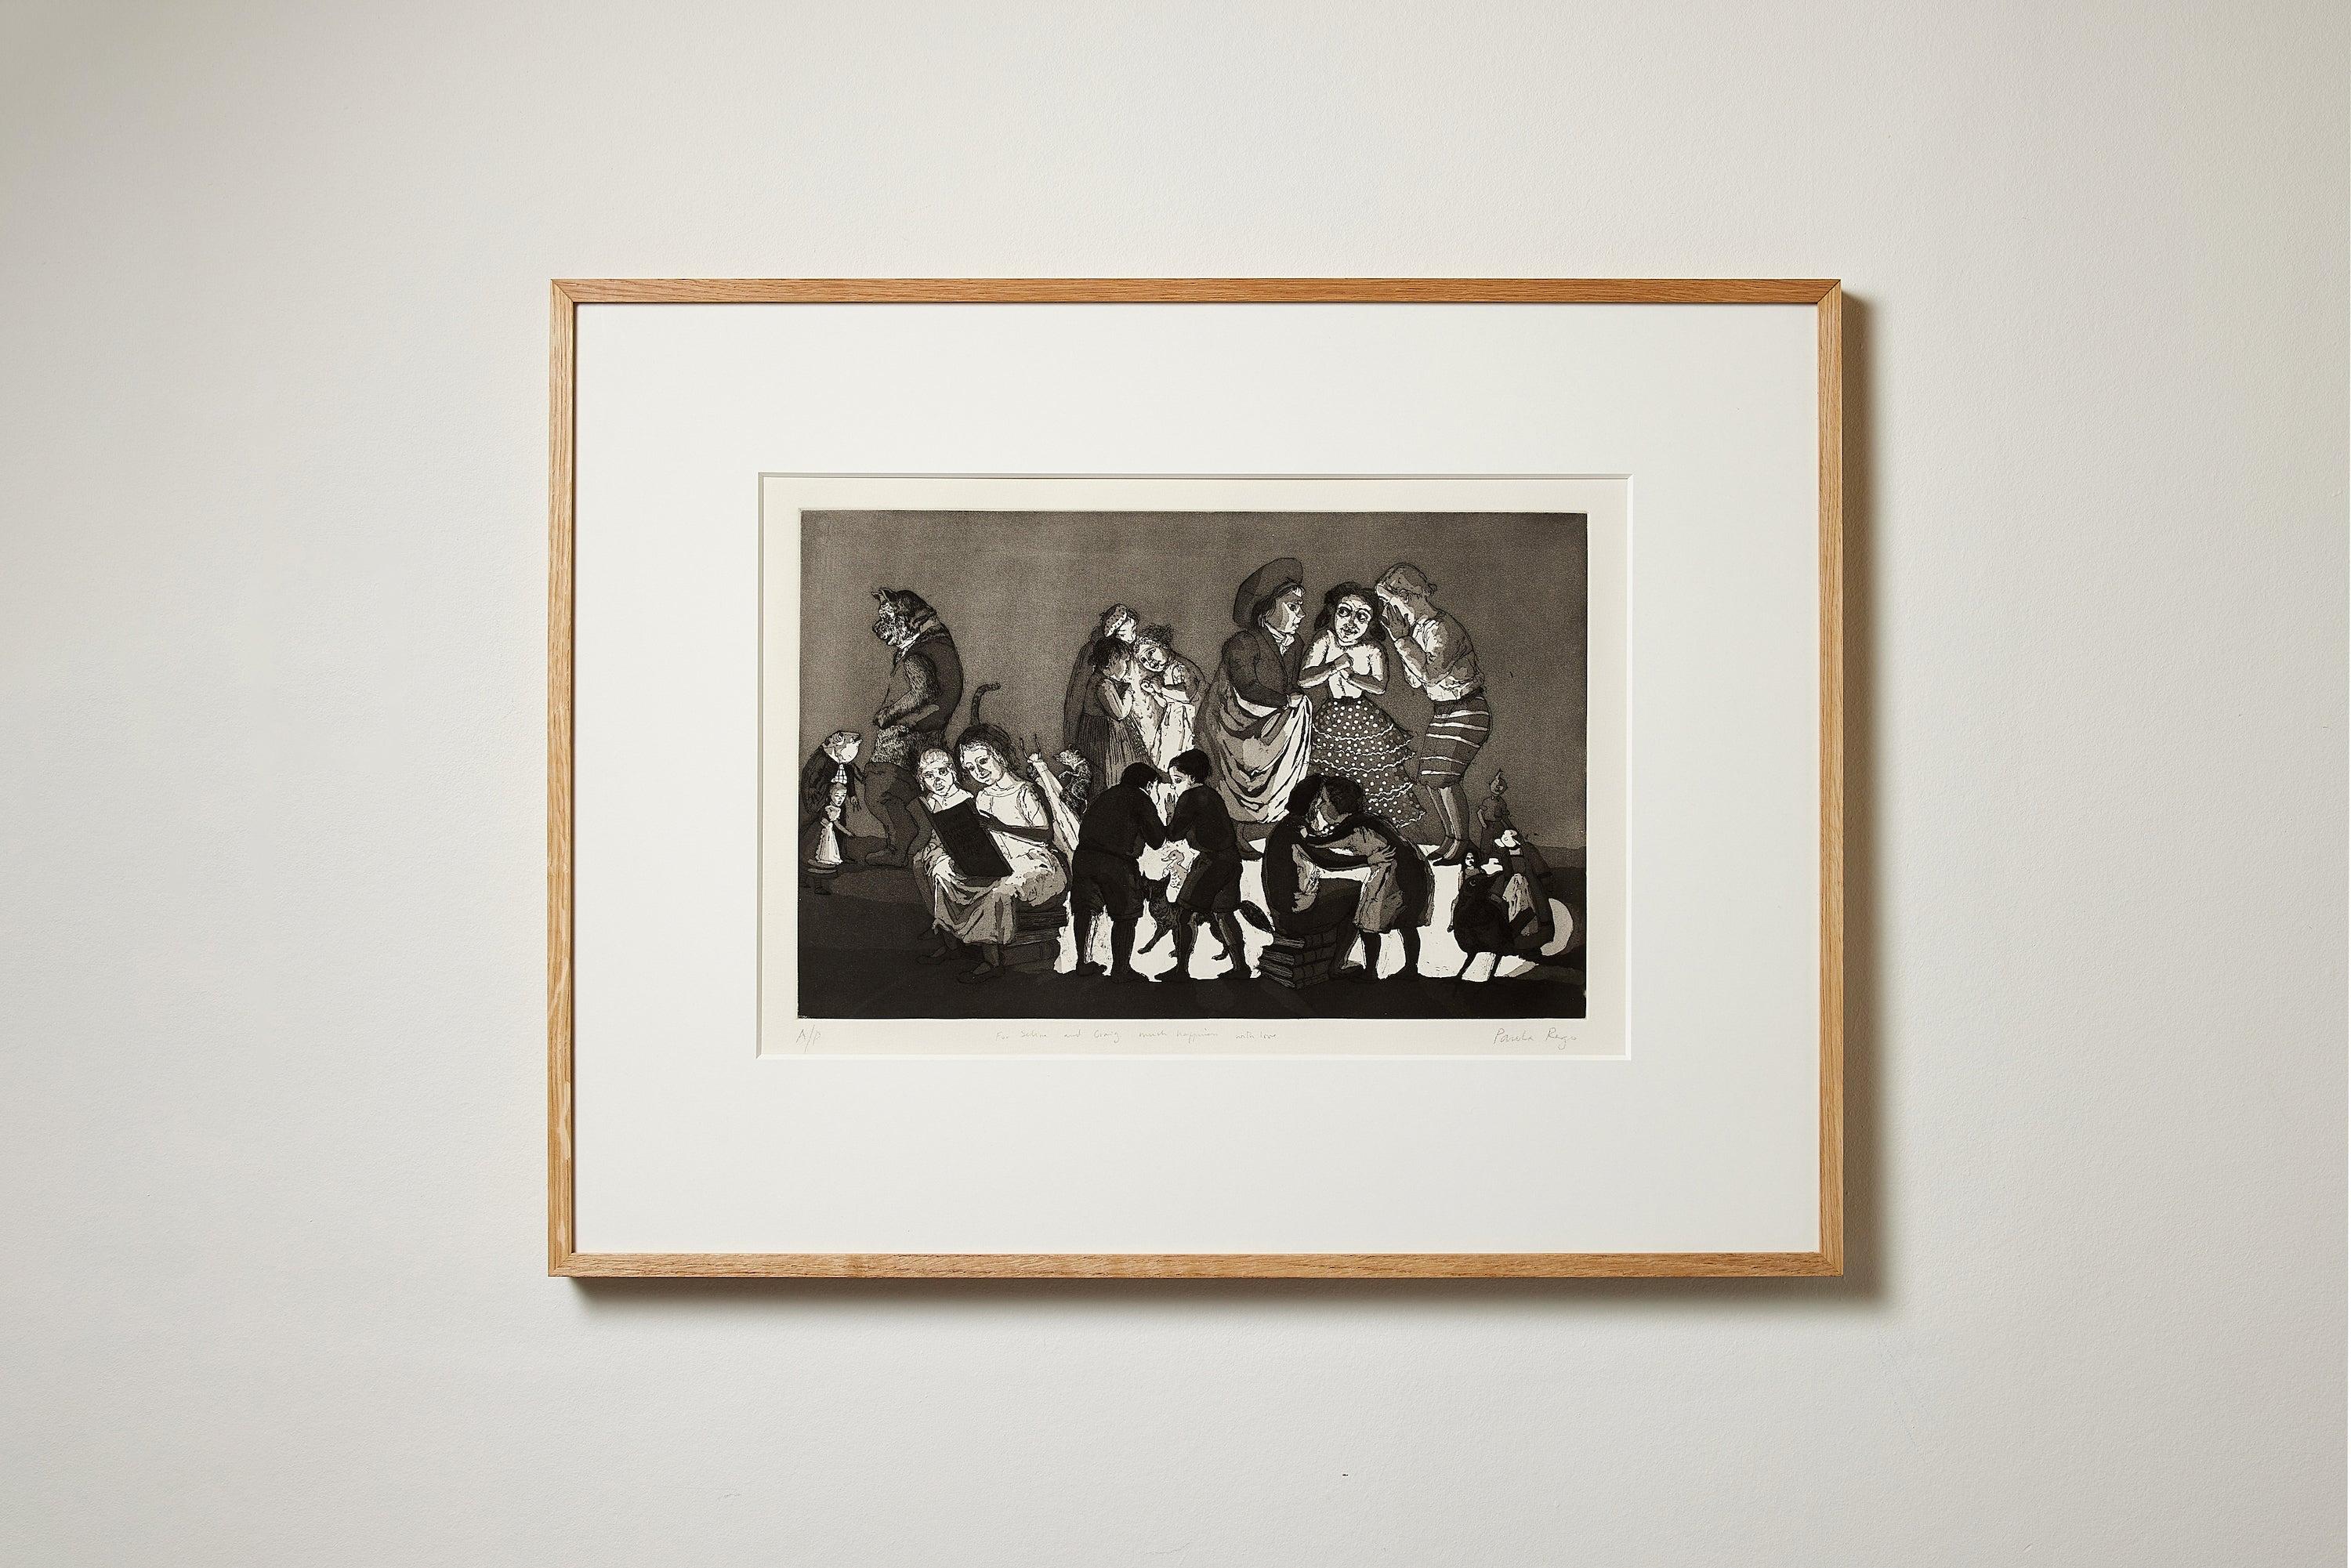 PAULA REGO
Secrets and Stories, 1989
Etching with aquatint, on Velin Arches paper
Signed, inscribed ‘A/P’ and dedicated ‘For Selina and Craig, much happiness, with love�’
One of fourteen artist’s proofs aside the edition of 50
Printed by Studio